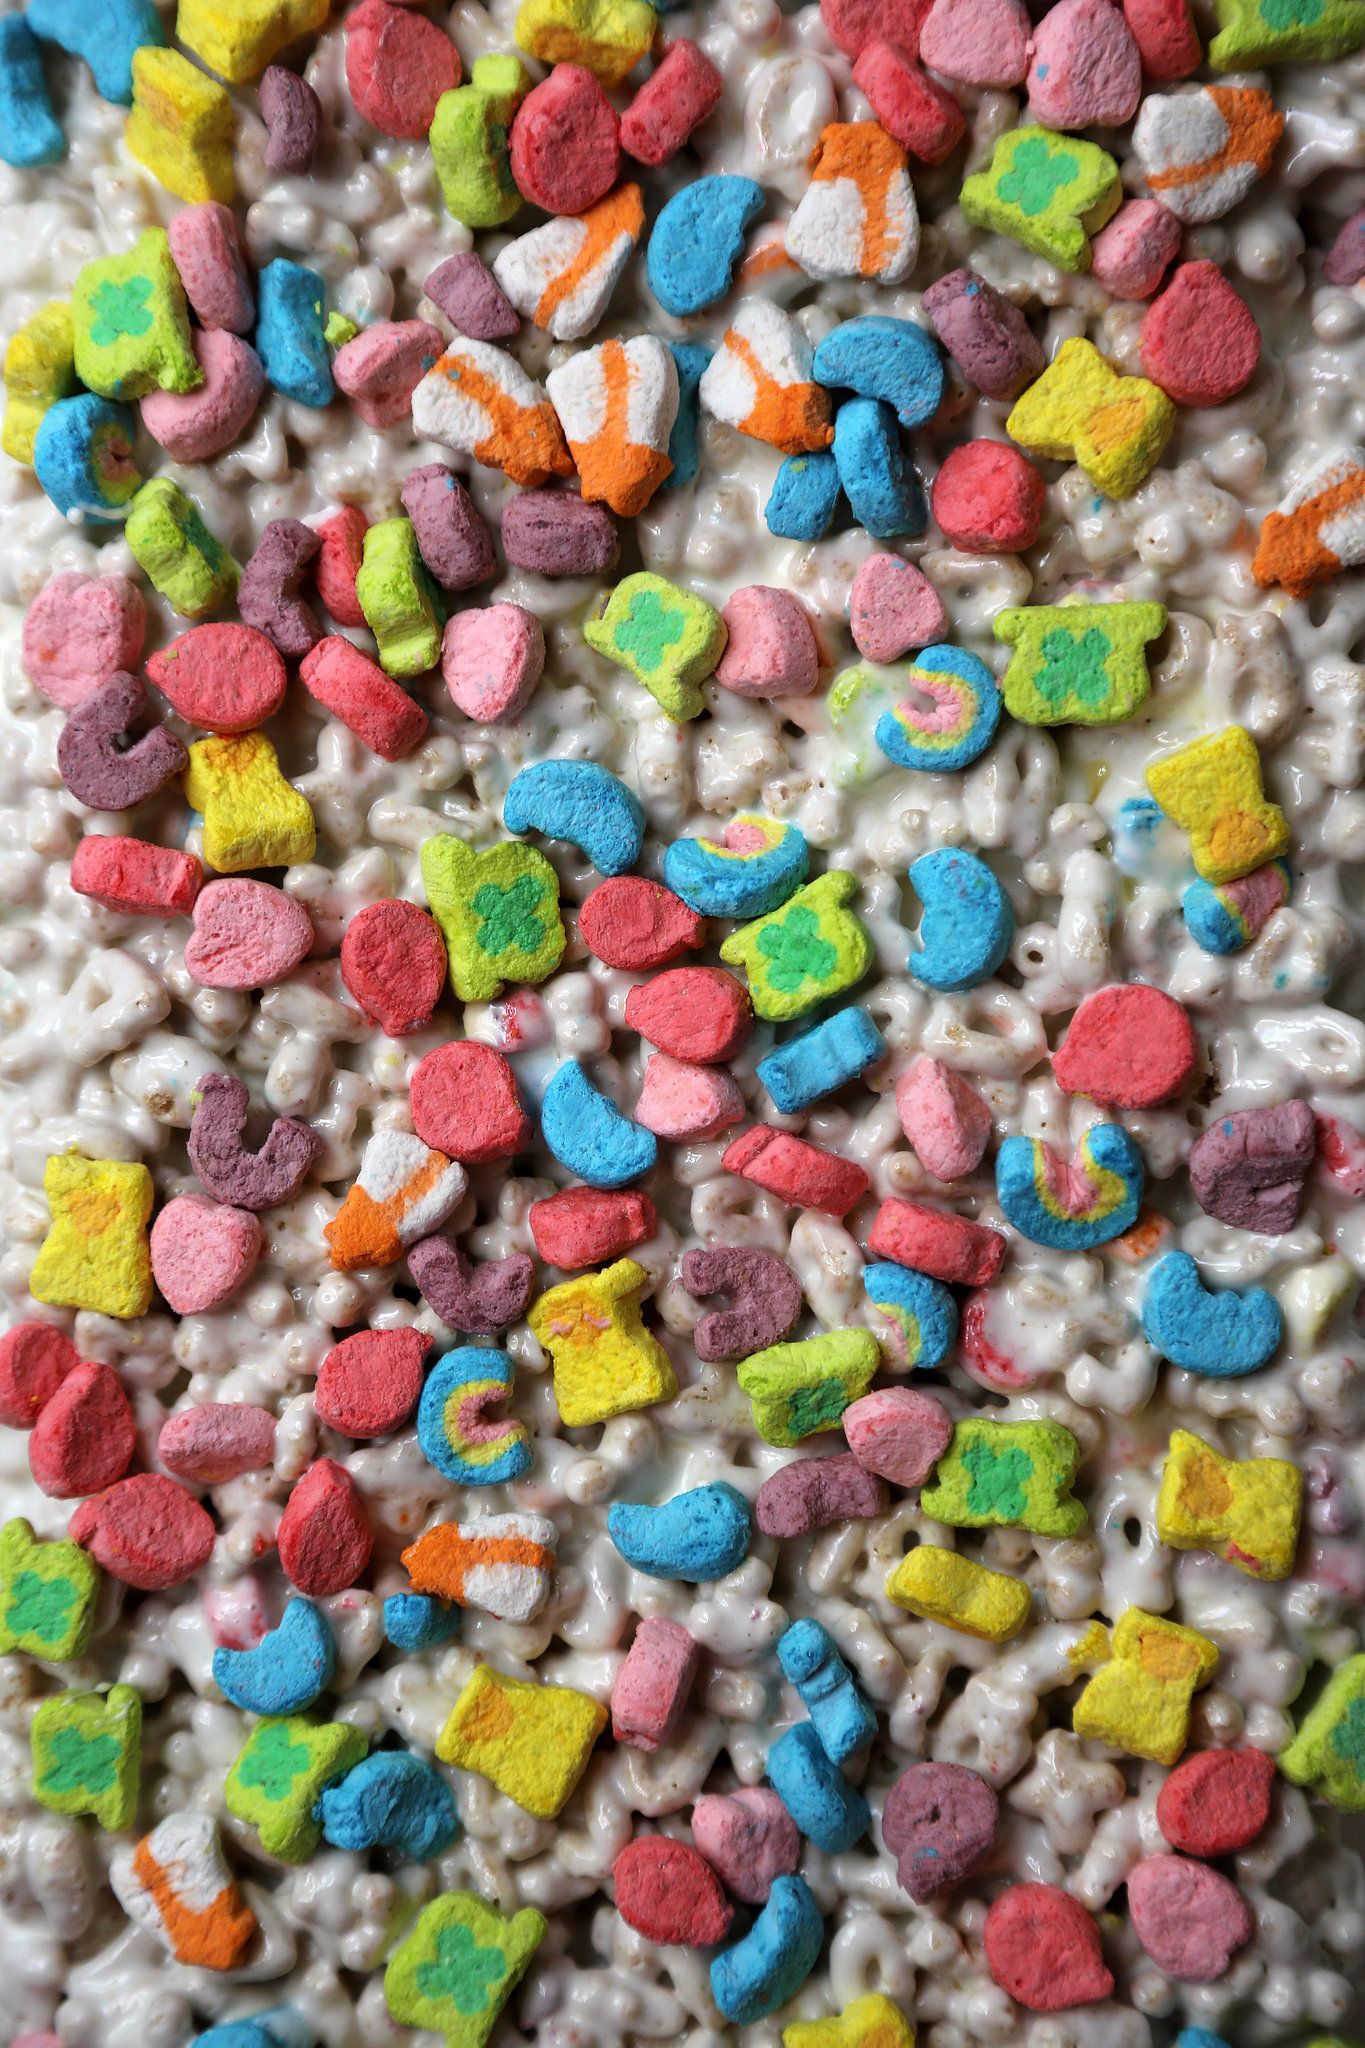 Lucky Charms Wallpapers